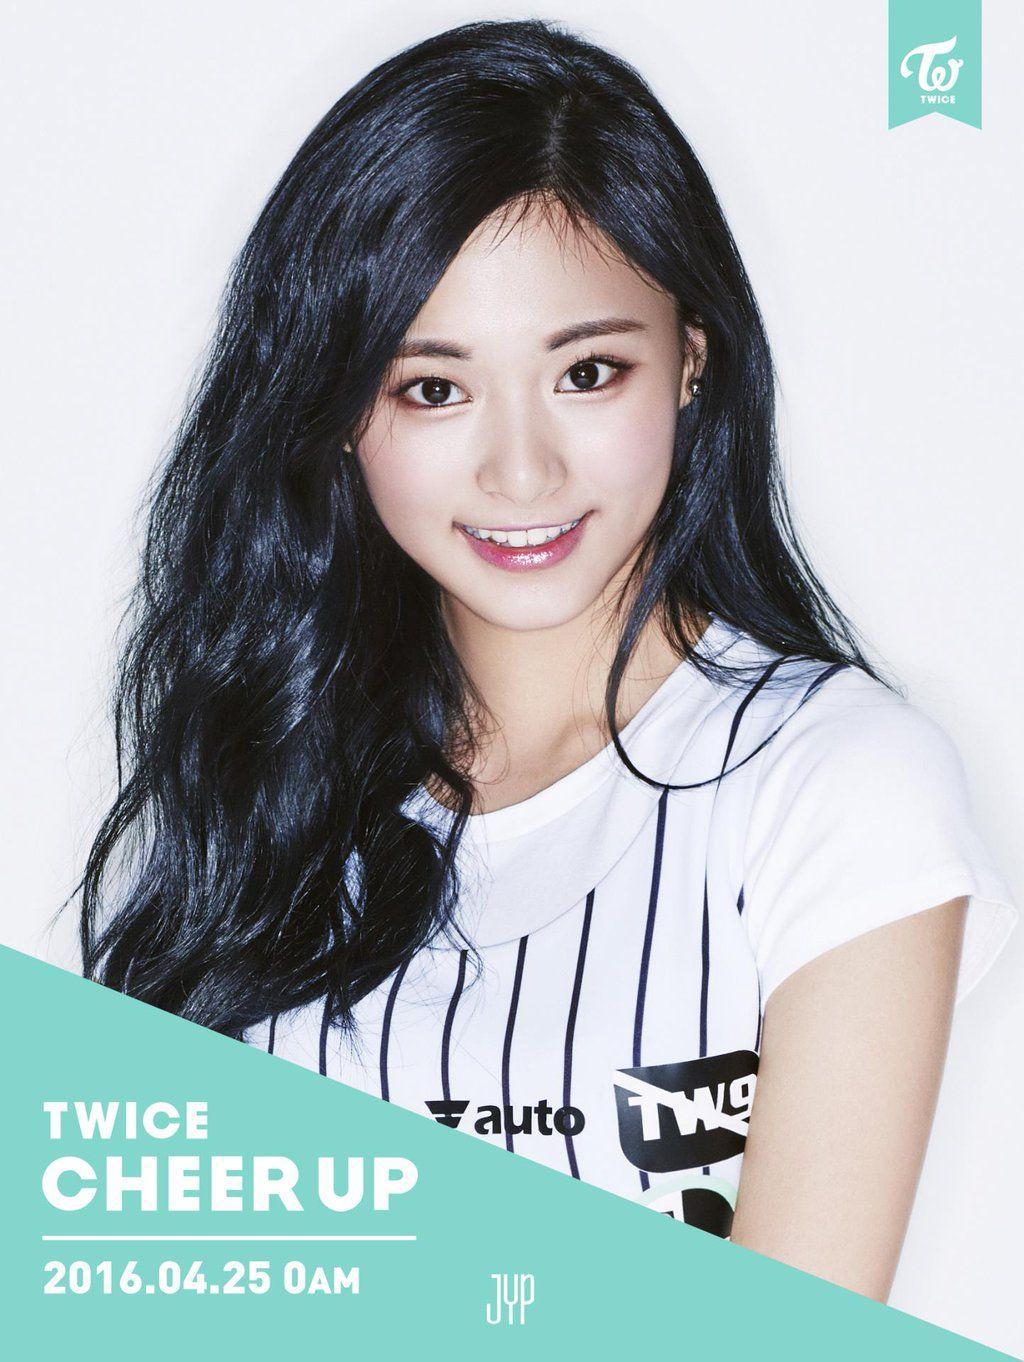 tzuyu cheer up teaser 2 | Today’s day, kpop and more. | Pinterest …